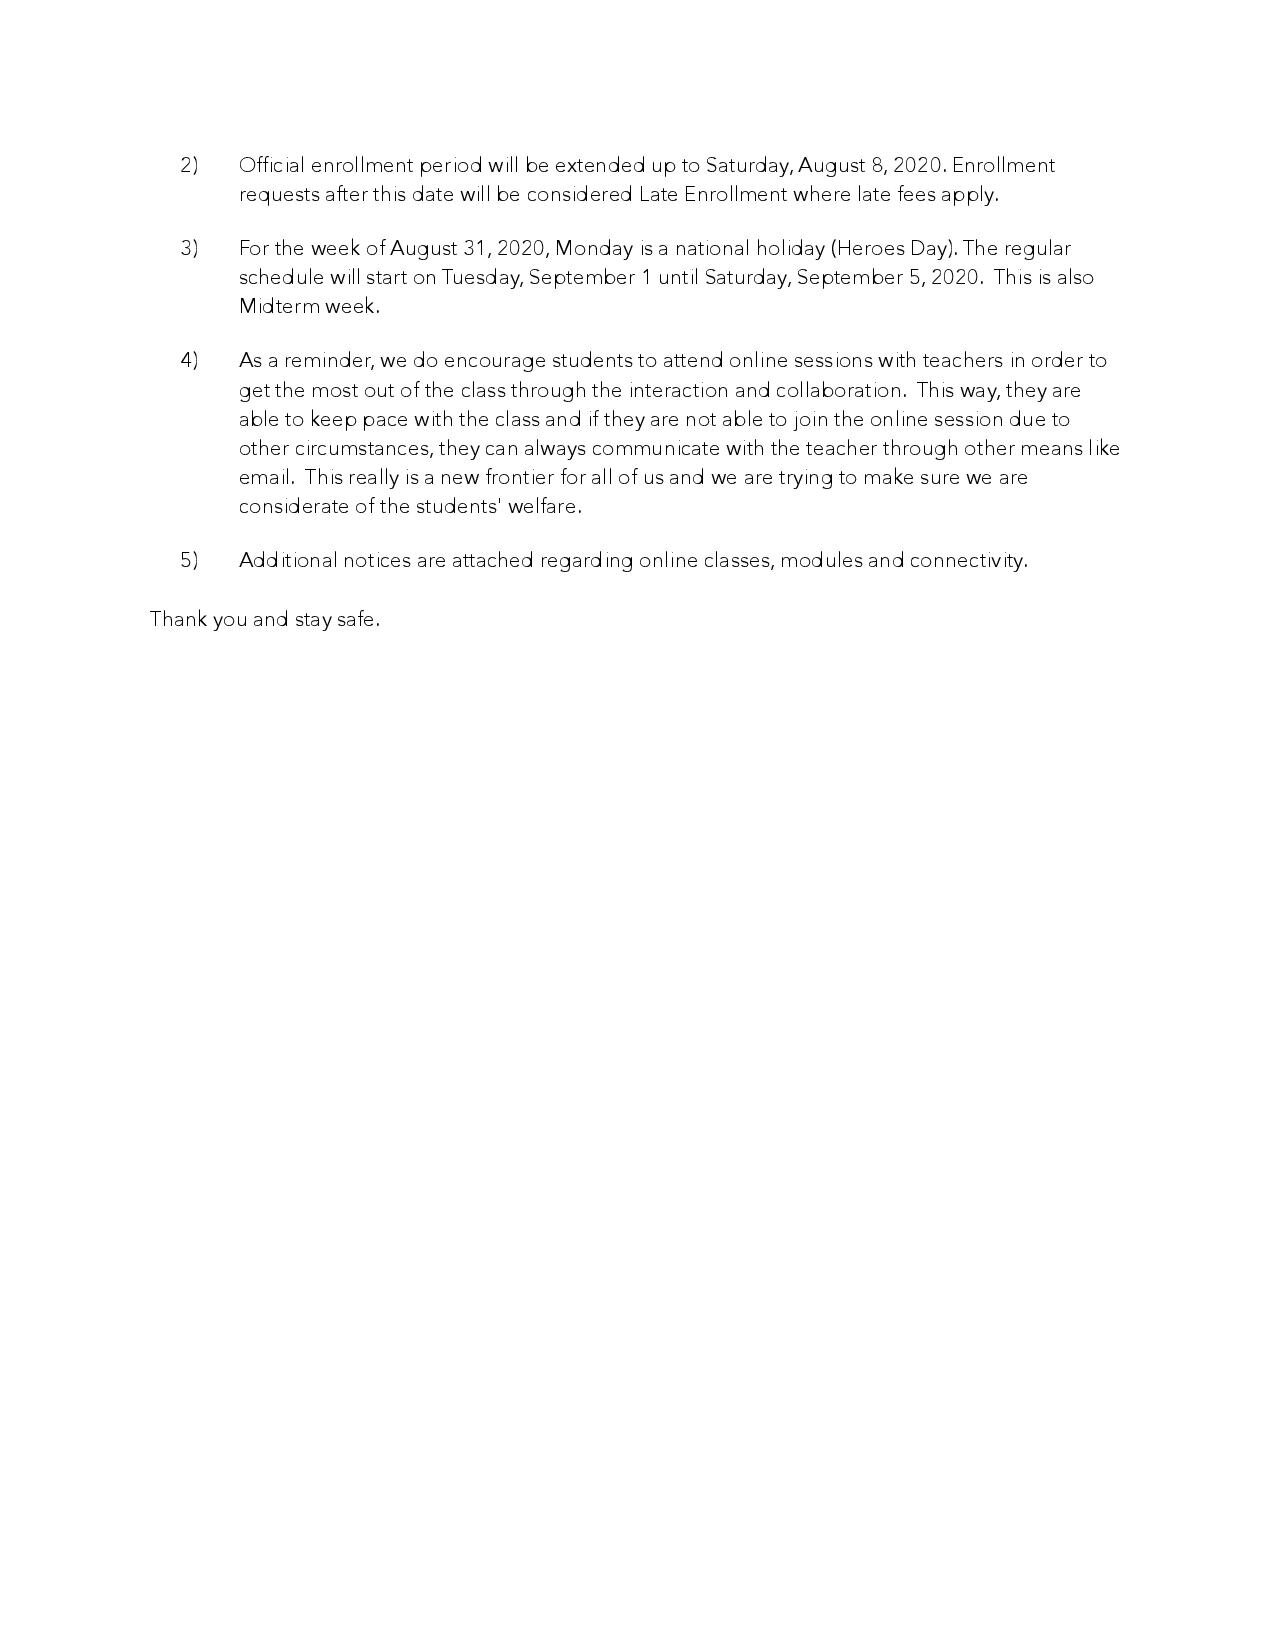 073120 Important Announcement-page-002.jpg